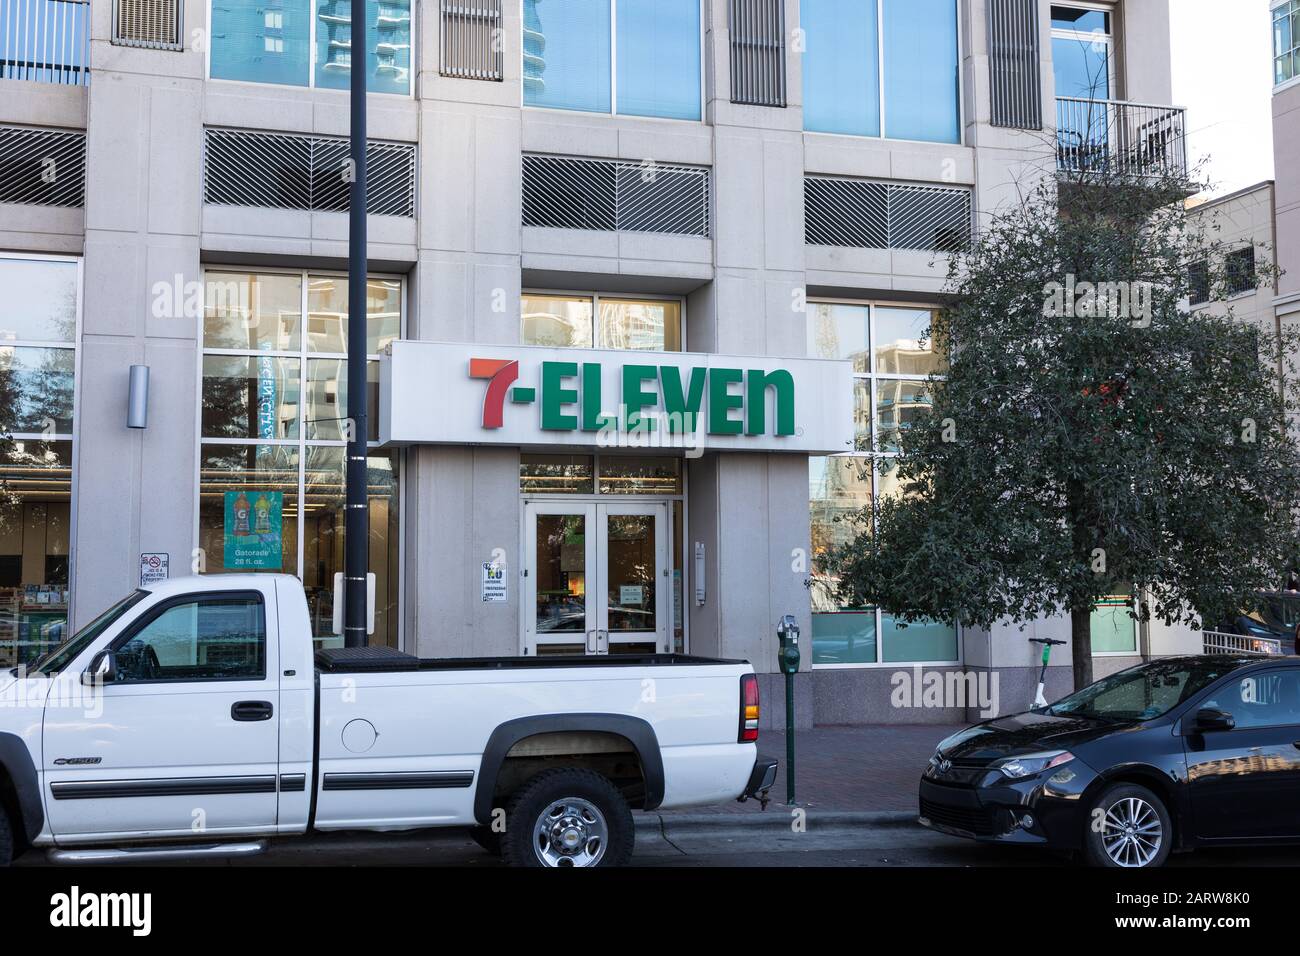 CHARLOTTE, NC, USA-26 JAN 2020: A 7-Eleven store in an urban location in uptown Charlotte. Stock Photo